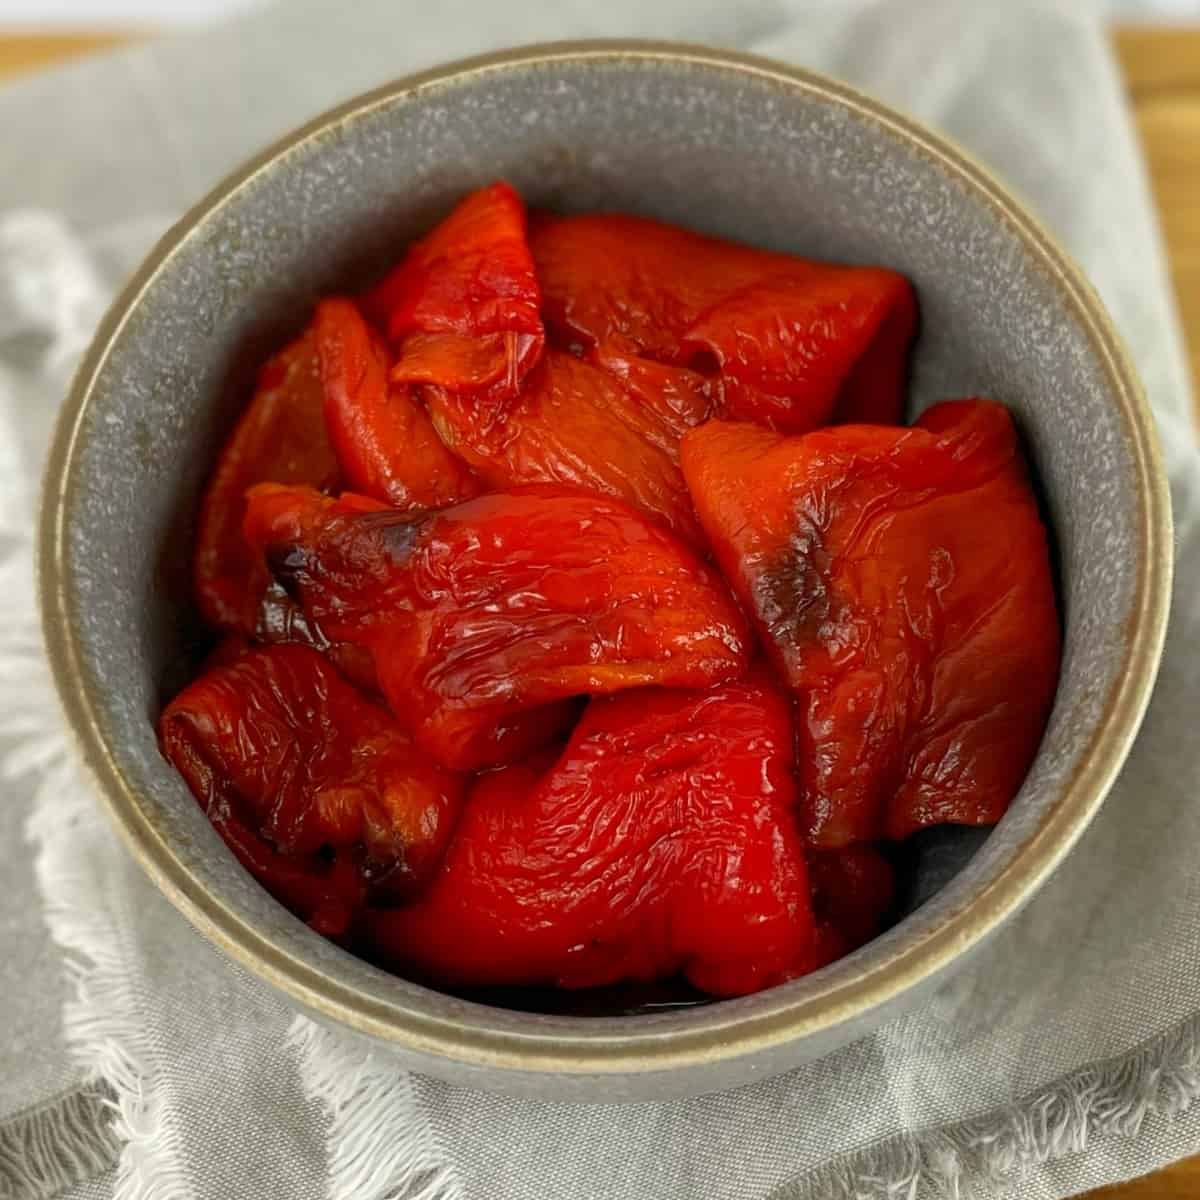 Sliced roasted red capsicums in a gray bowl sitting on a gray tea towel.